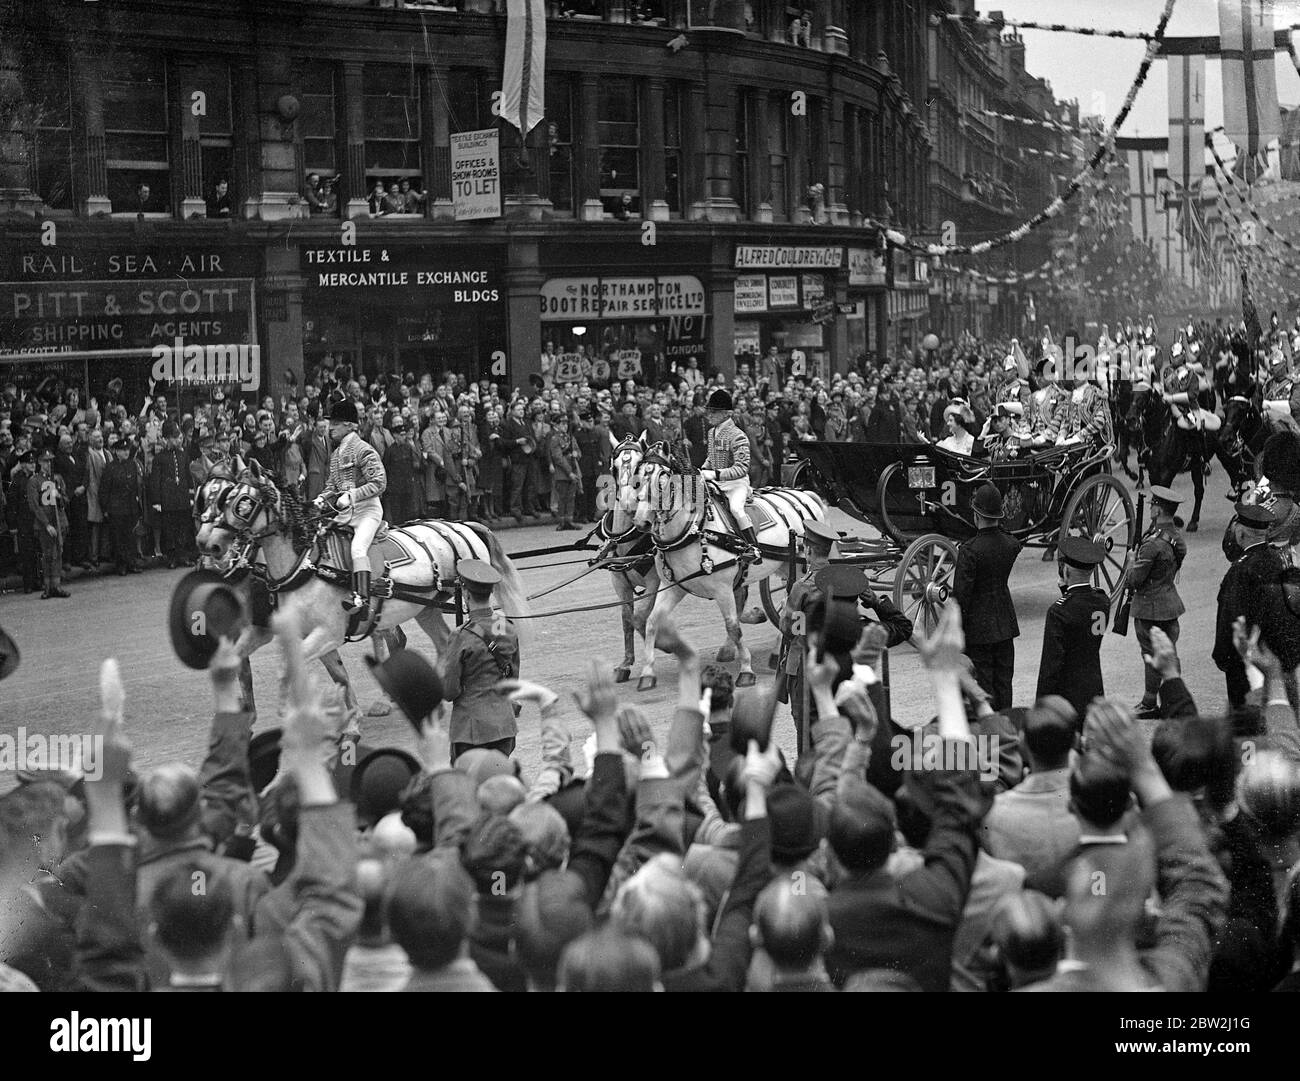 The Royal tour of Canada and the USA by King George VI and Queen Elizabeth , 1939 King and Queen celebrated the first day of their return by attending an official luncheon at the Guildhall , London , Britain . Photo shows the Royal procession approaching St Paul 's Cathedral on the way to the Guildhall . Stock Photo